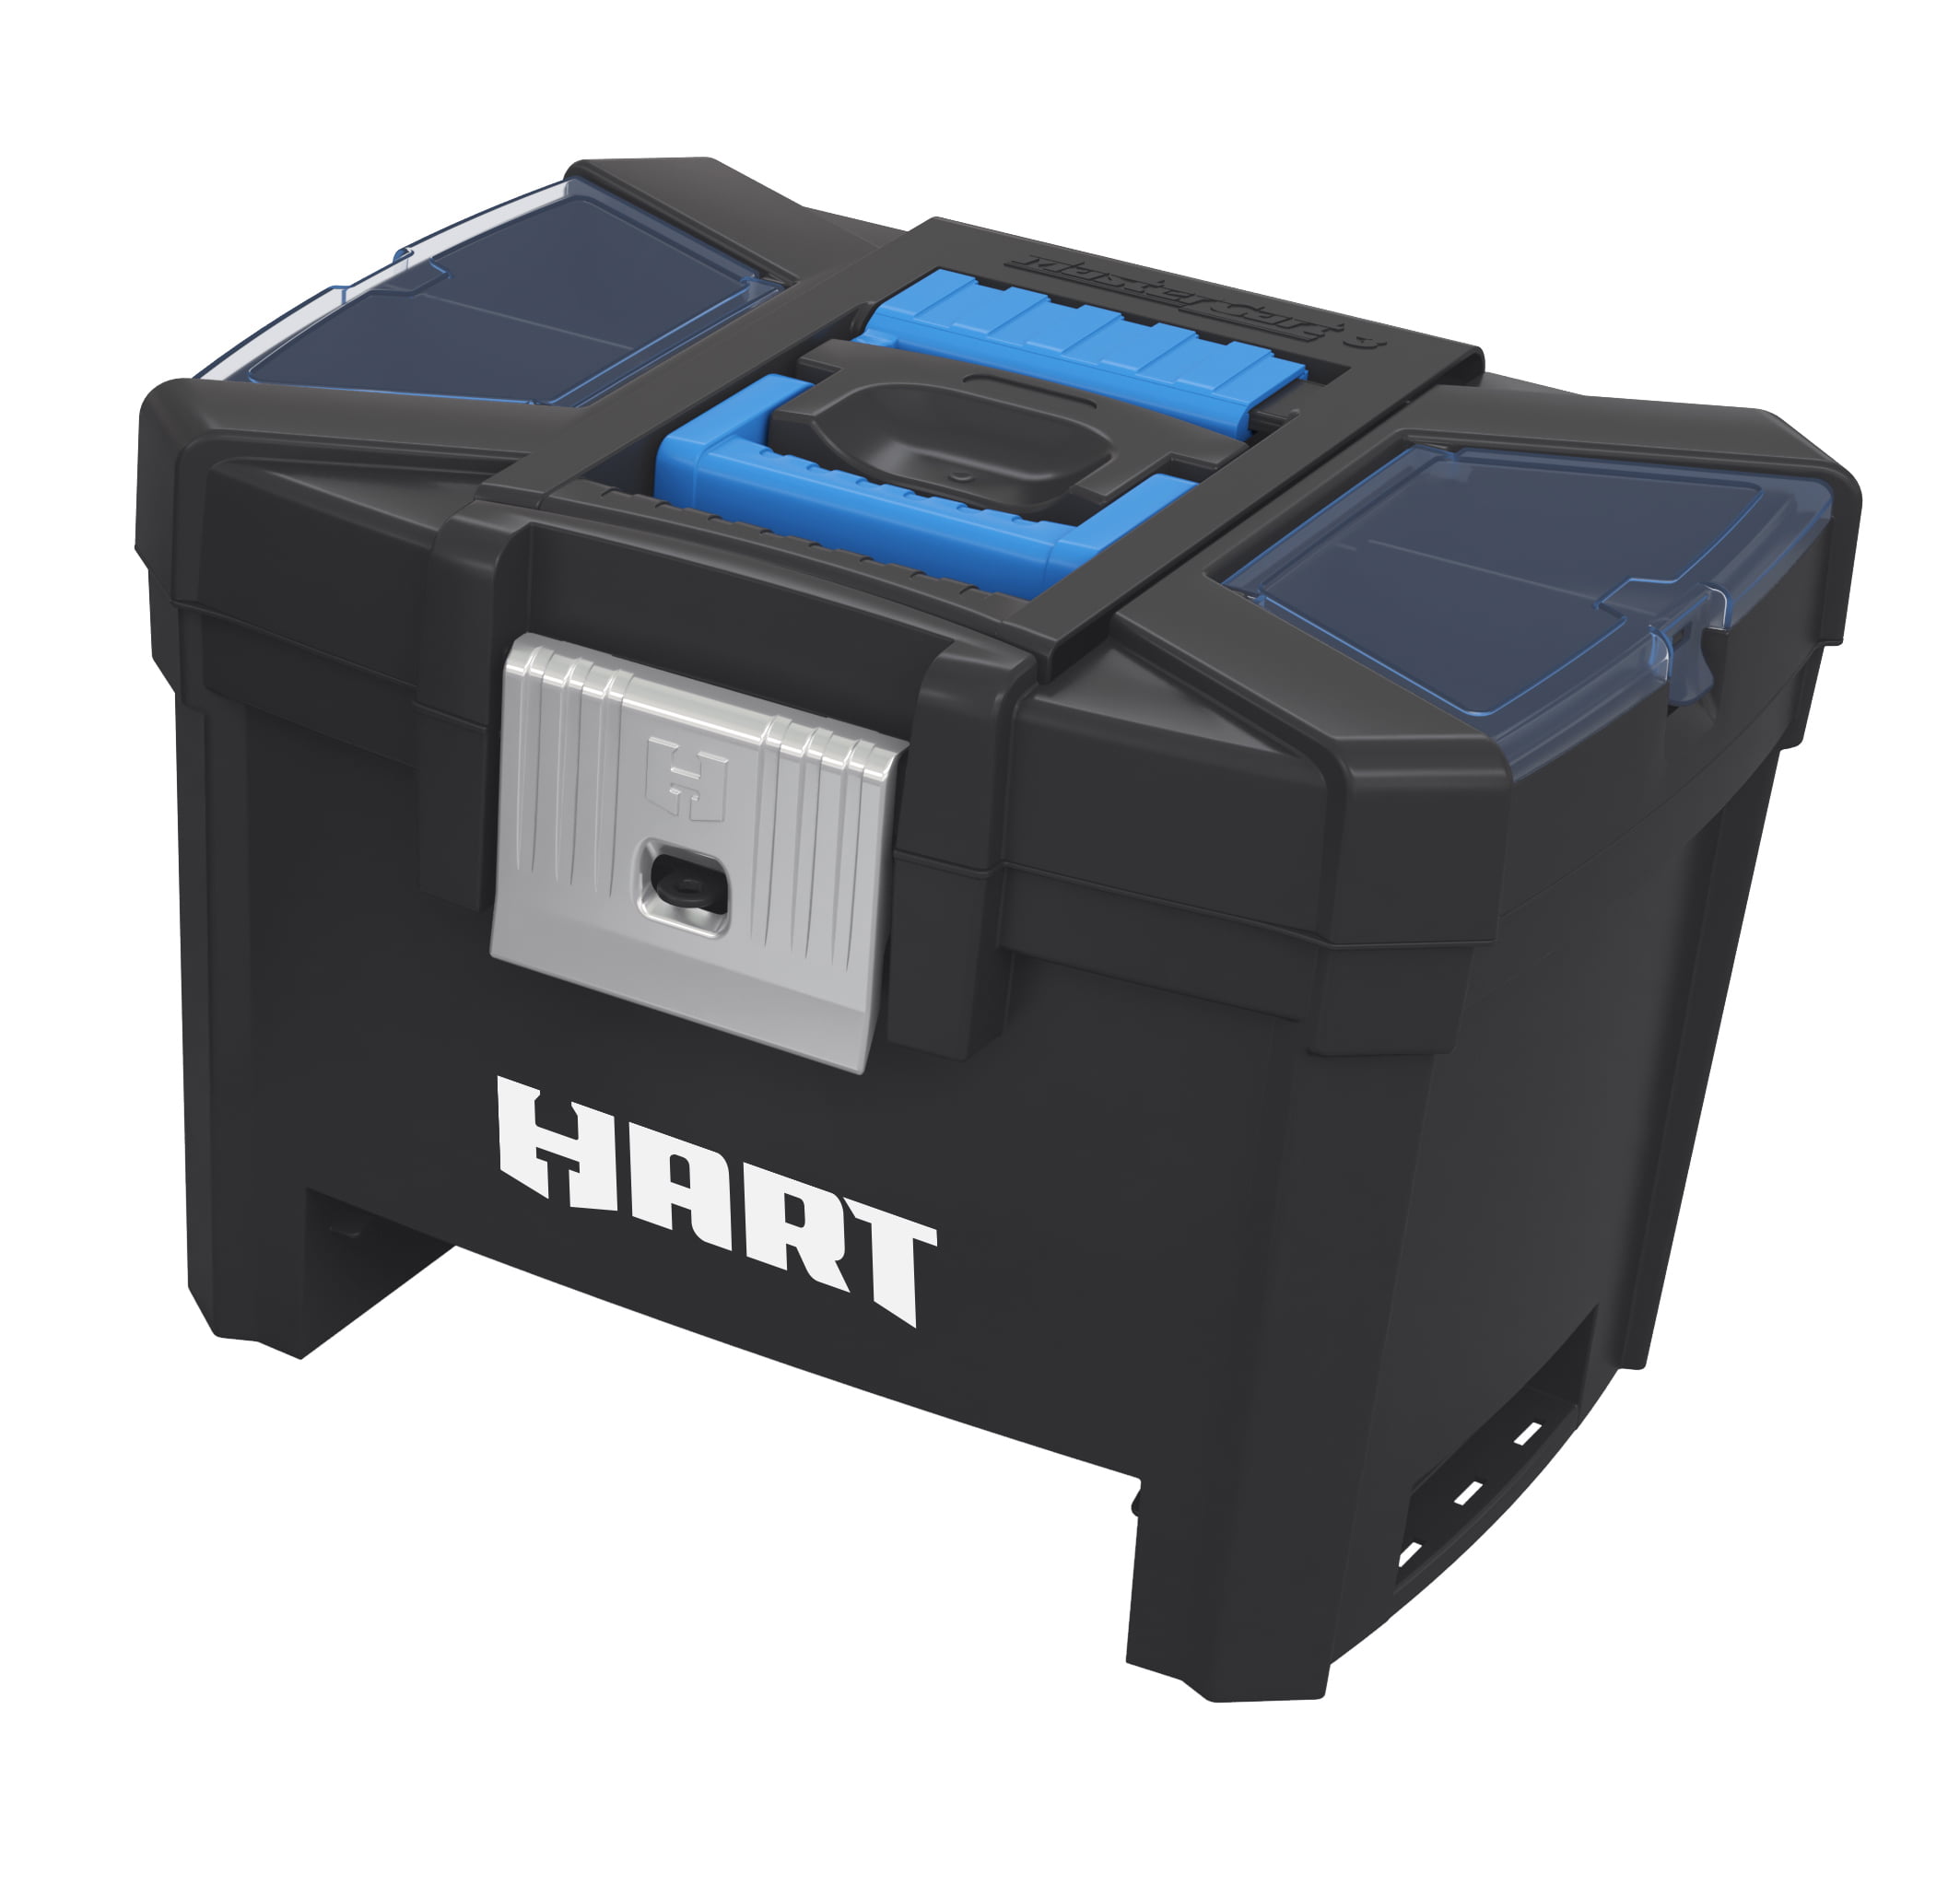 Smart Mobile System Rolling Plastic Tool Box HART 3-in-1 Black & Blue 16-Inch 